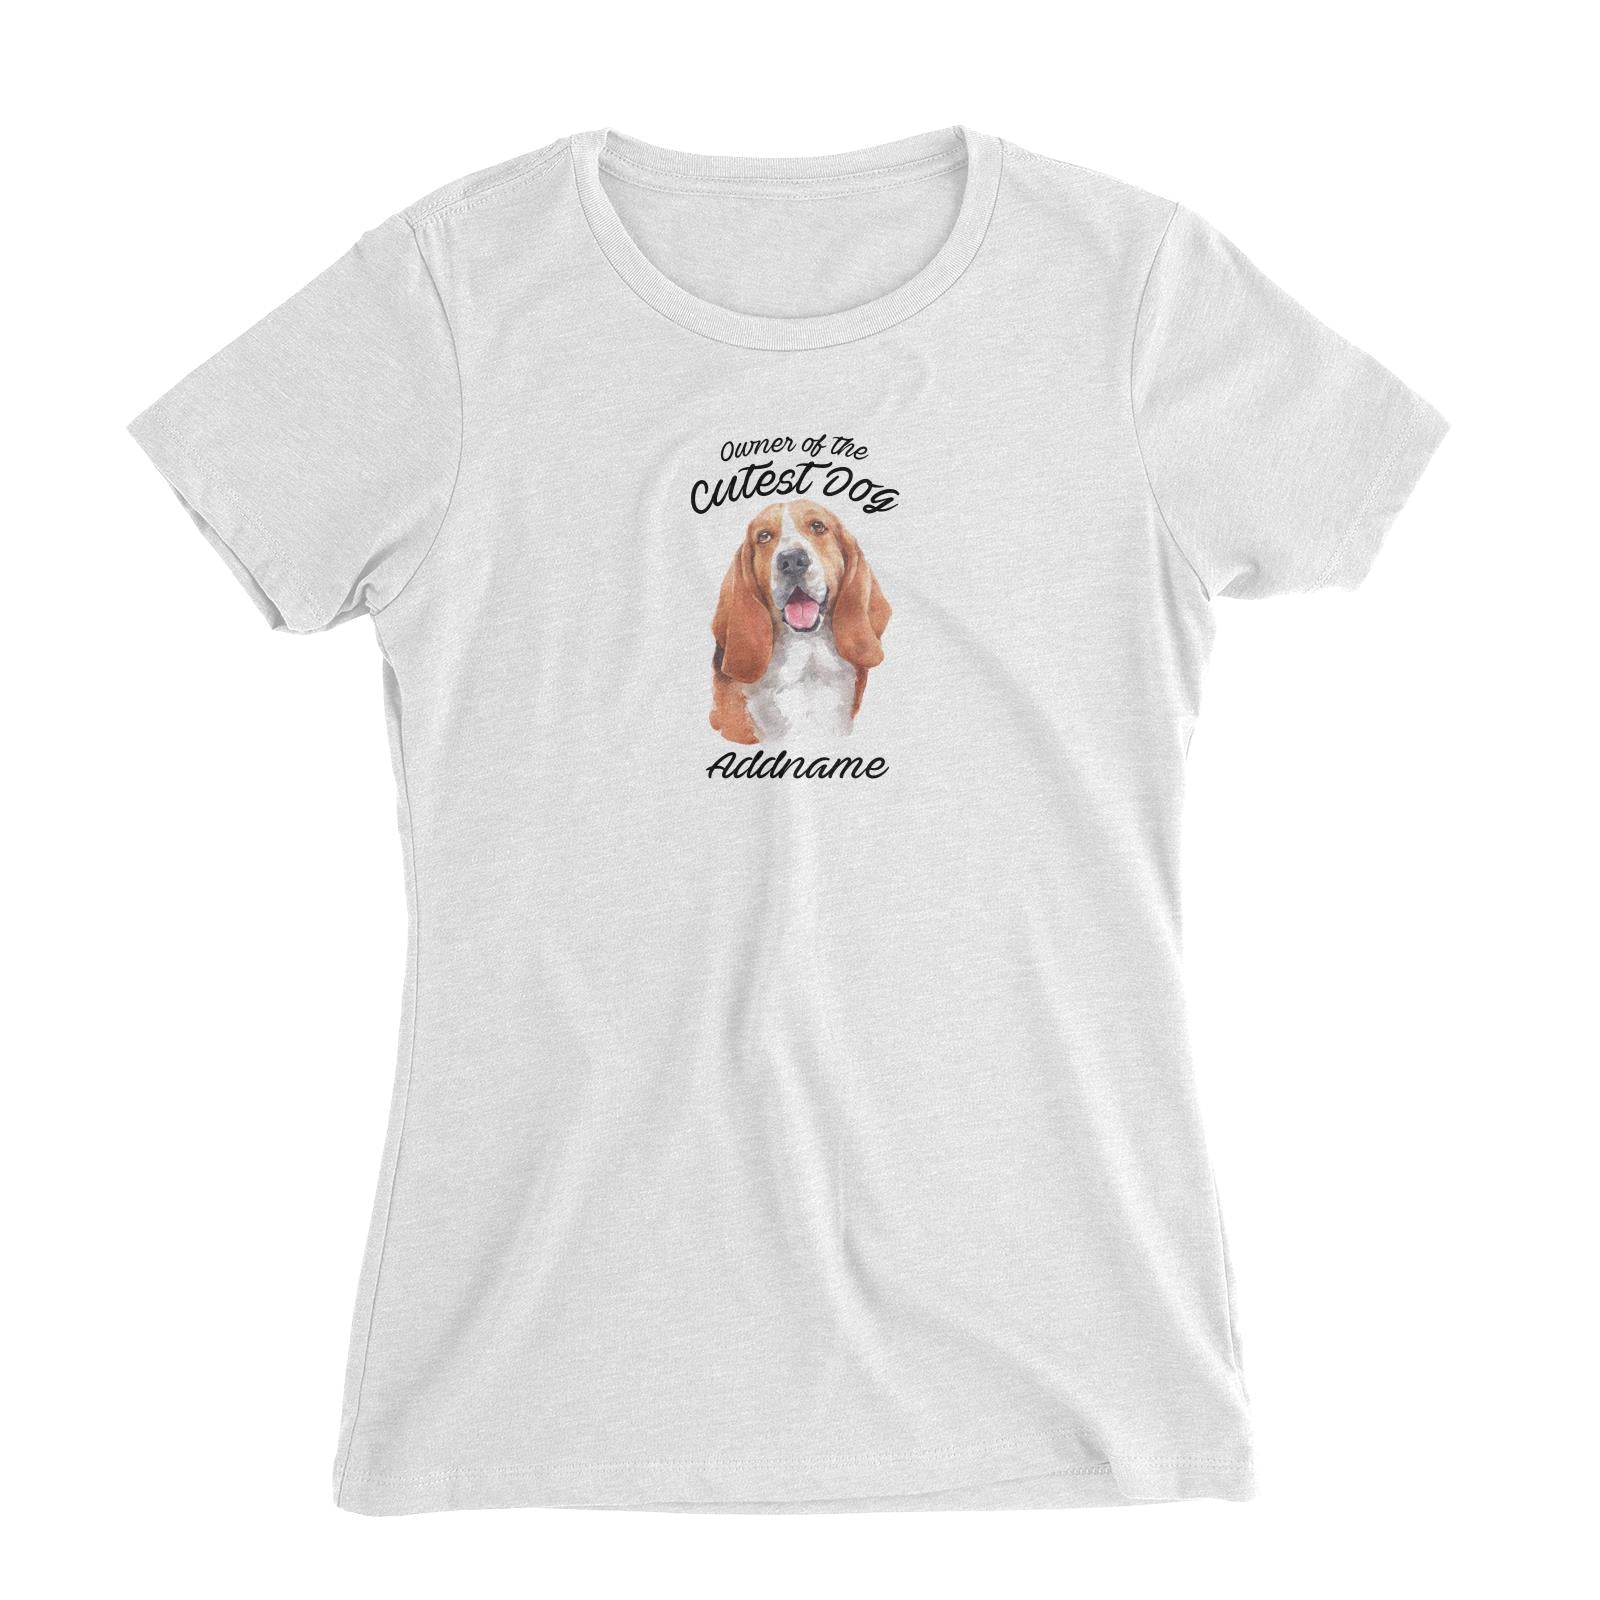 Watercolor Dog Owner Of The Cutest Dog Basset Hound Addname Women's Slim Fit T-Shirt